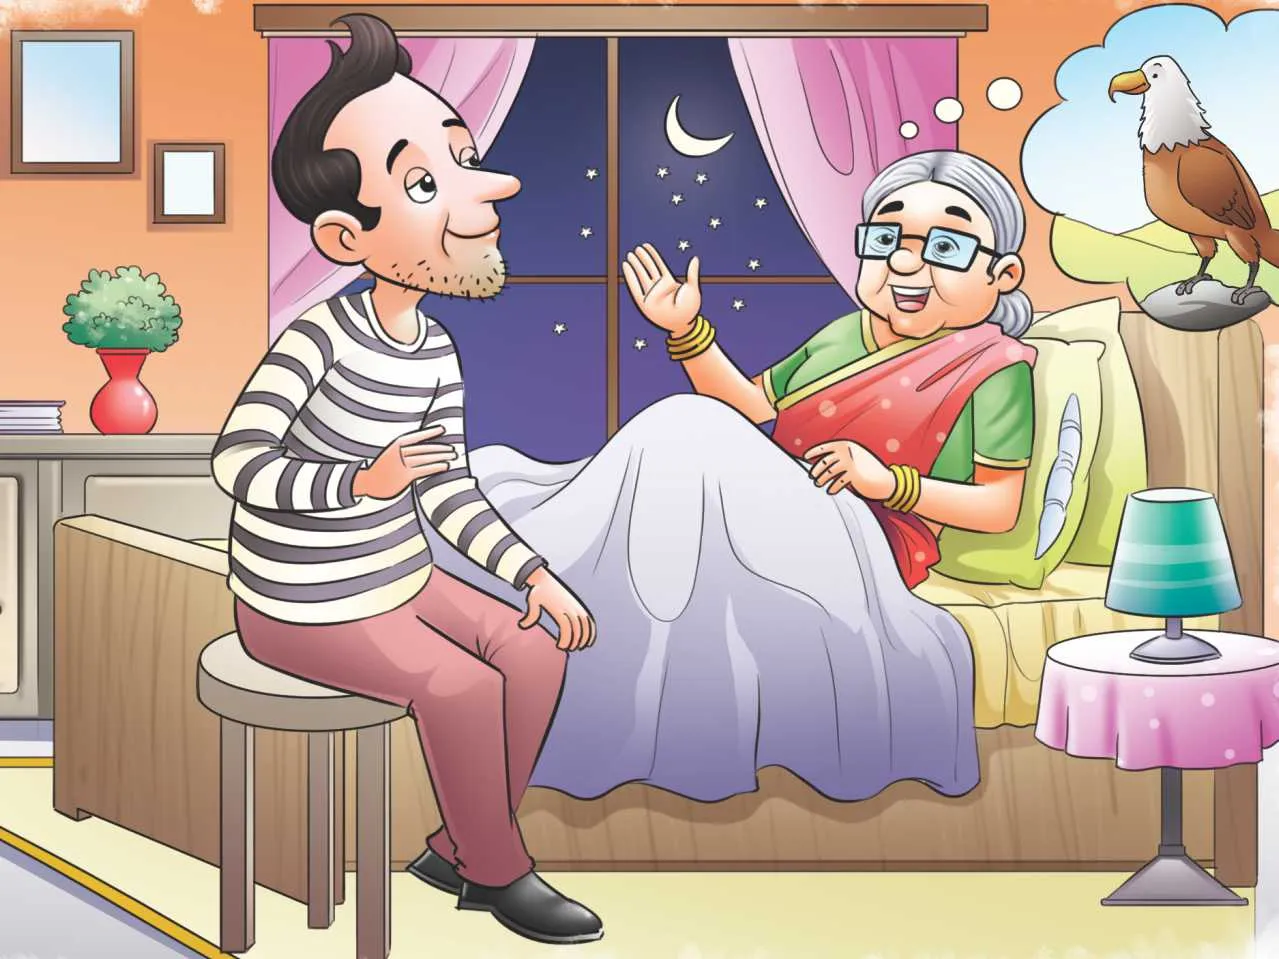 wise old lady with thief cartoon image